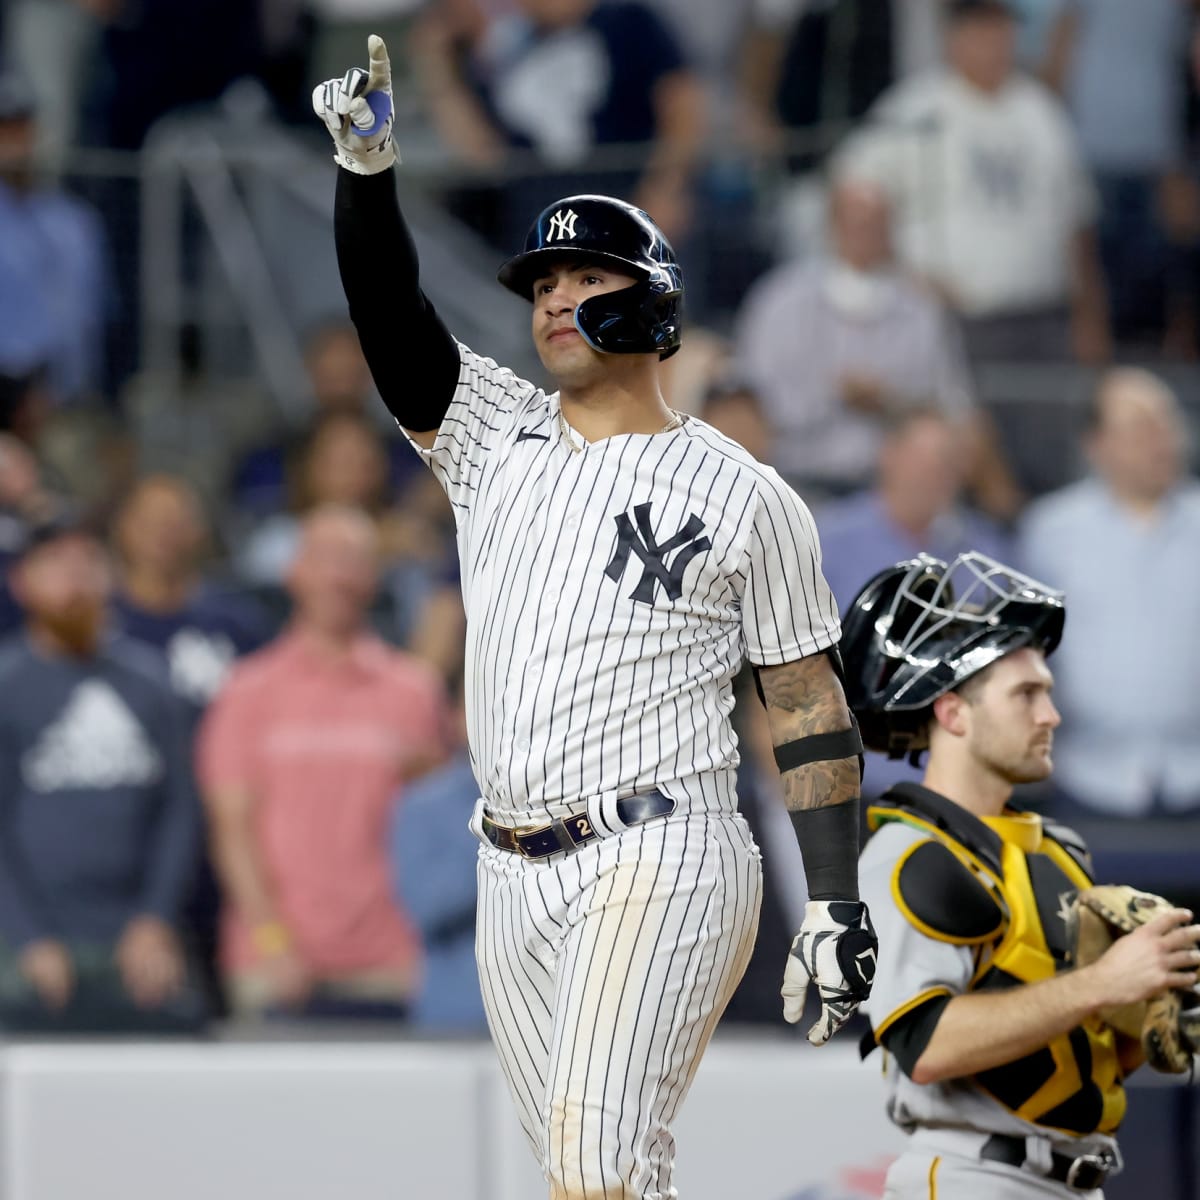 Gleyber Torres knows he has to do better